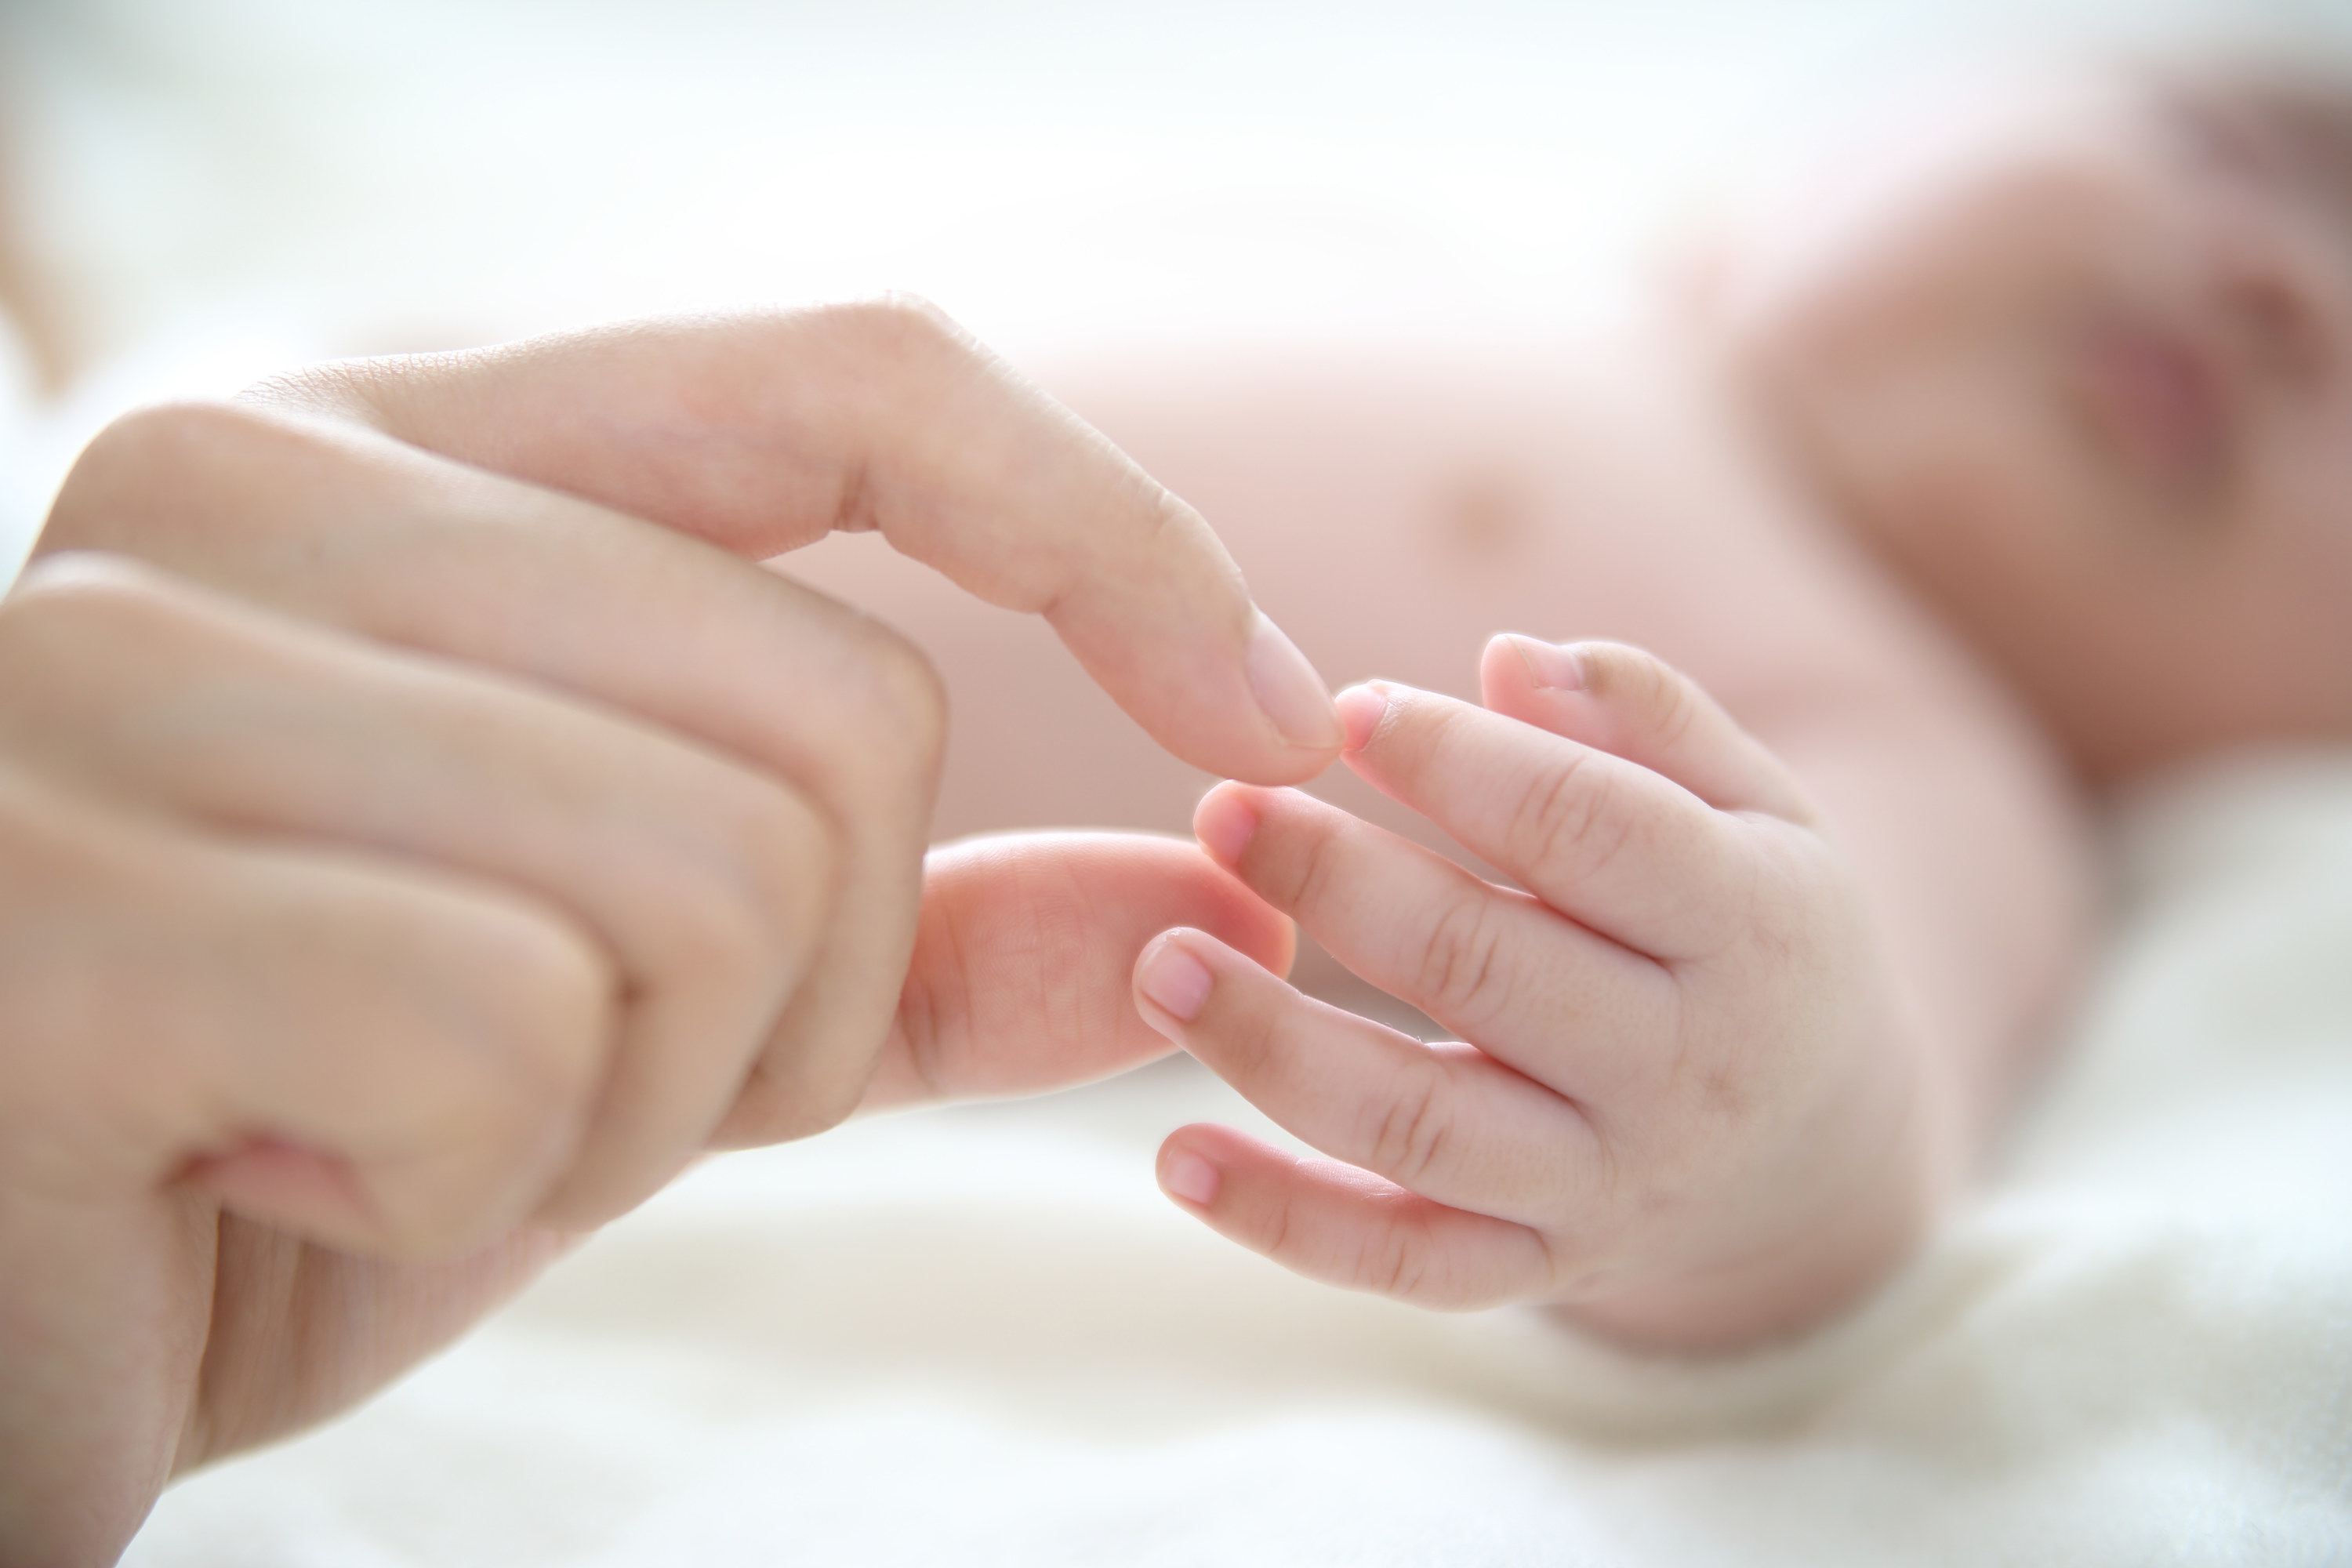 A baby has their hand held by adult